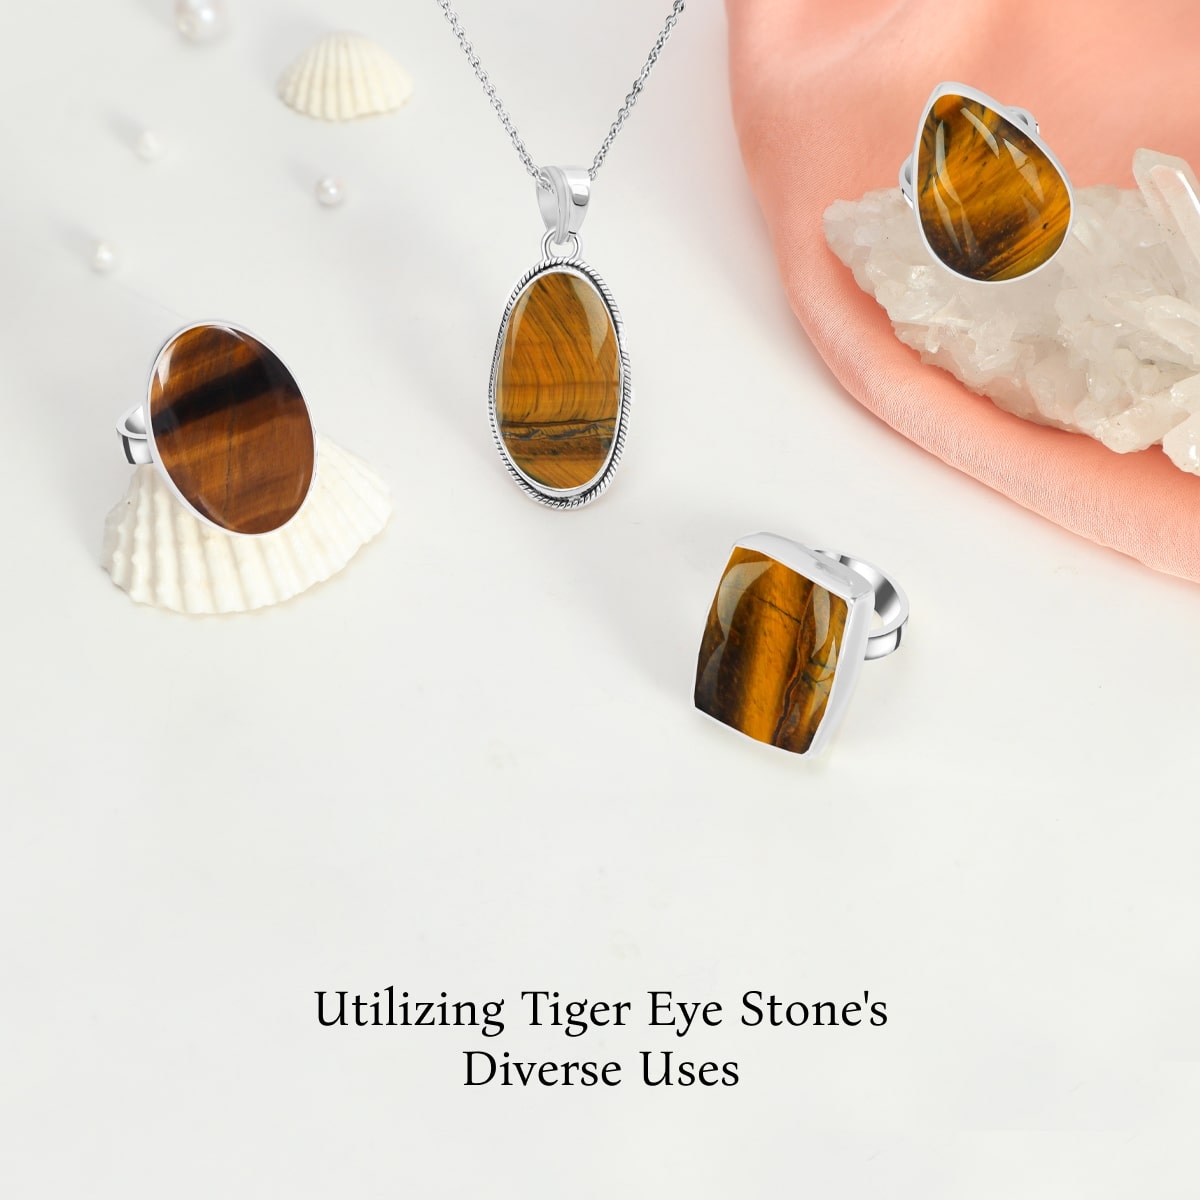 Uses of Tiger Eye Stone